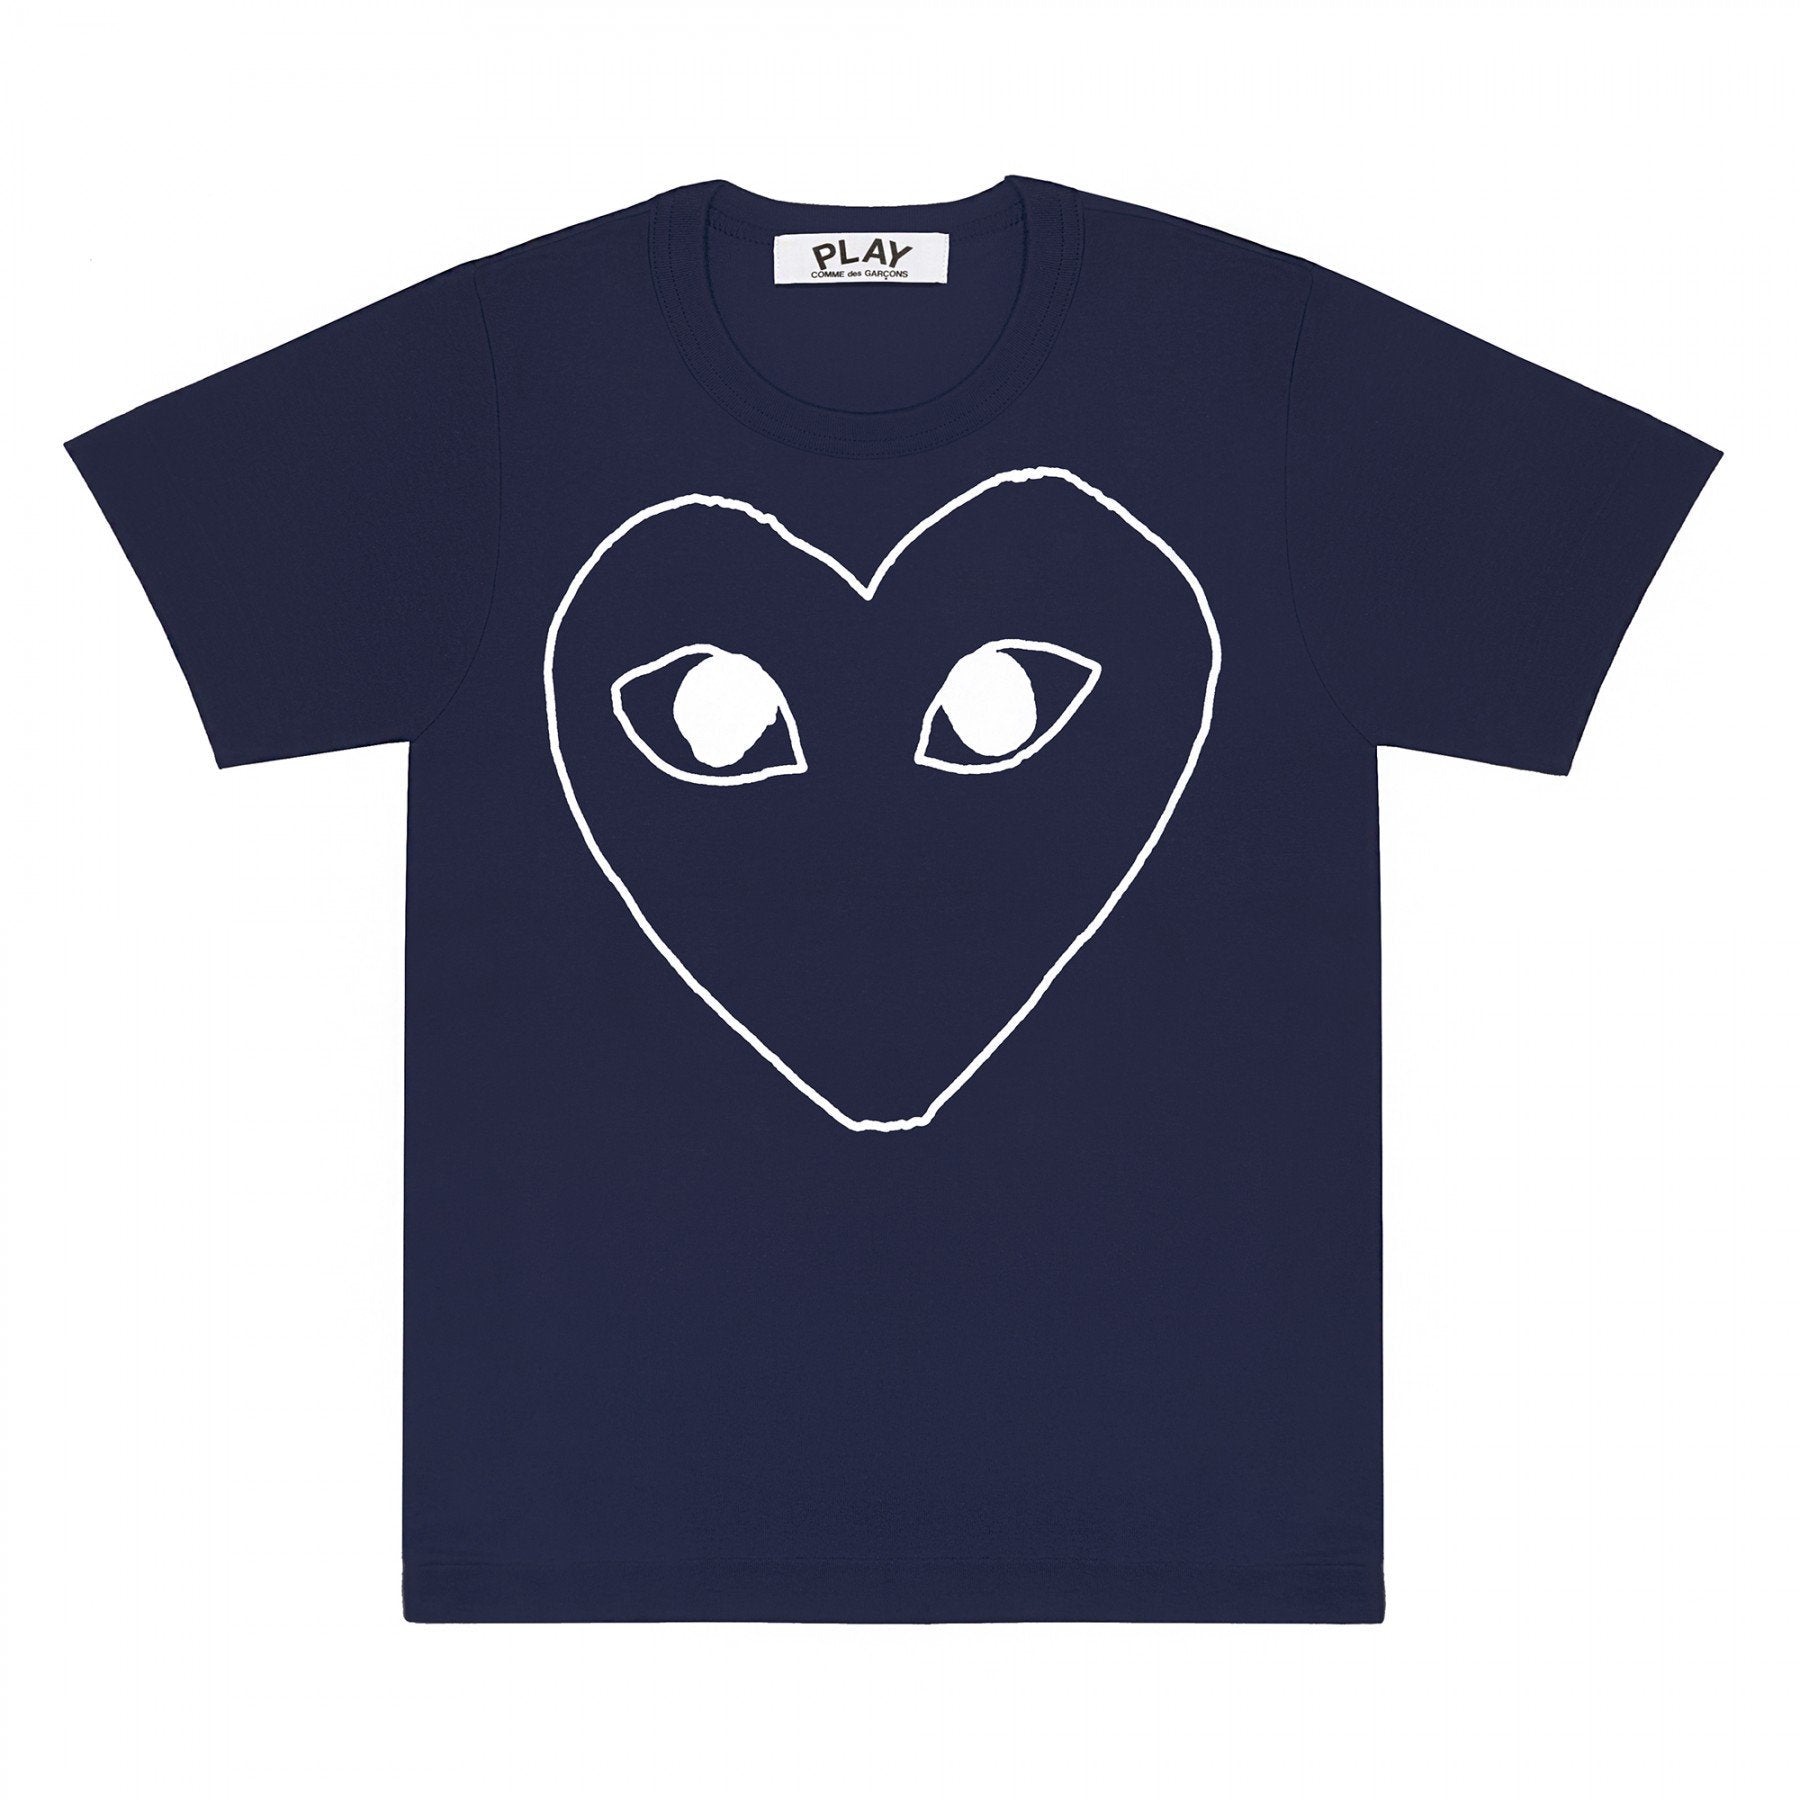 PLAY T-Shirt With Heart Outline